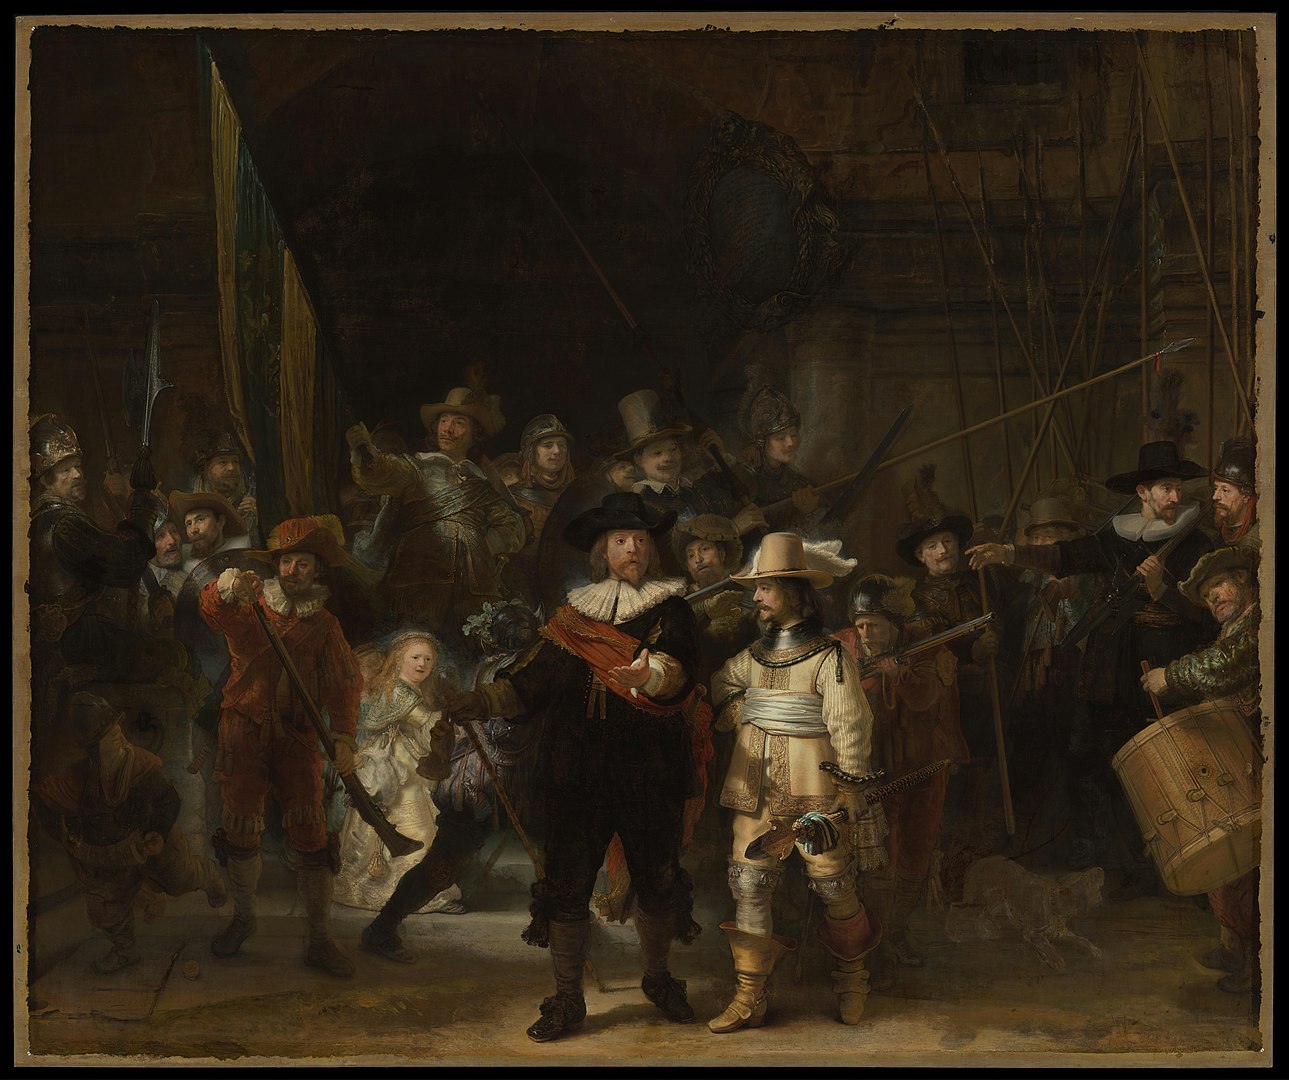 The Night Watch, 1642, Rembrandt, Public domain, via Wikimedia Commons